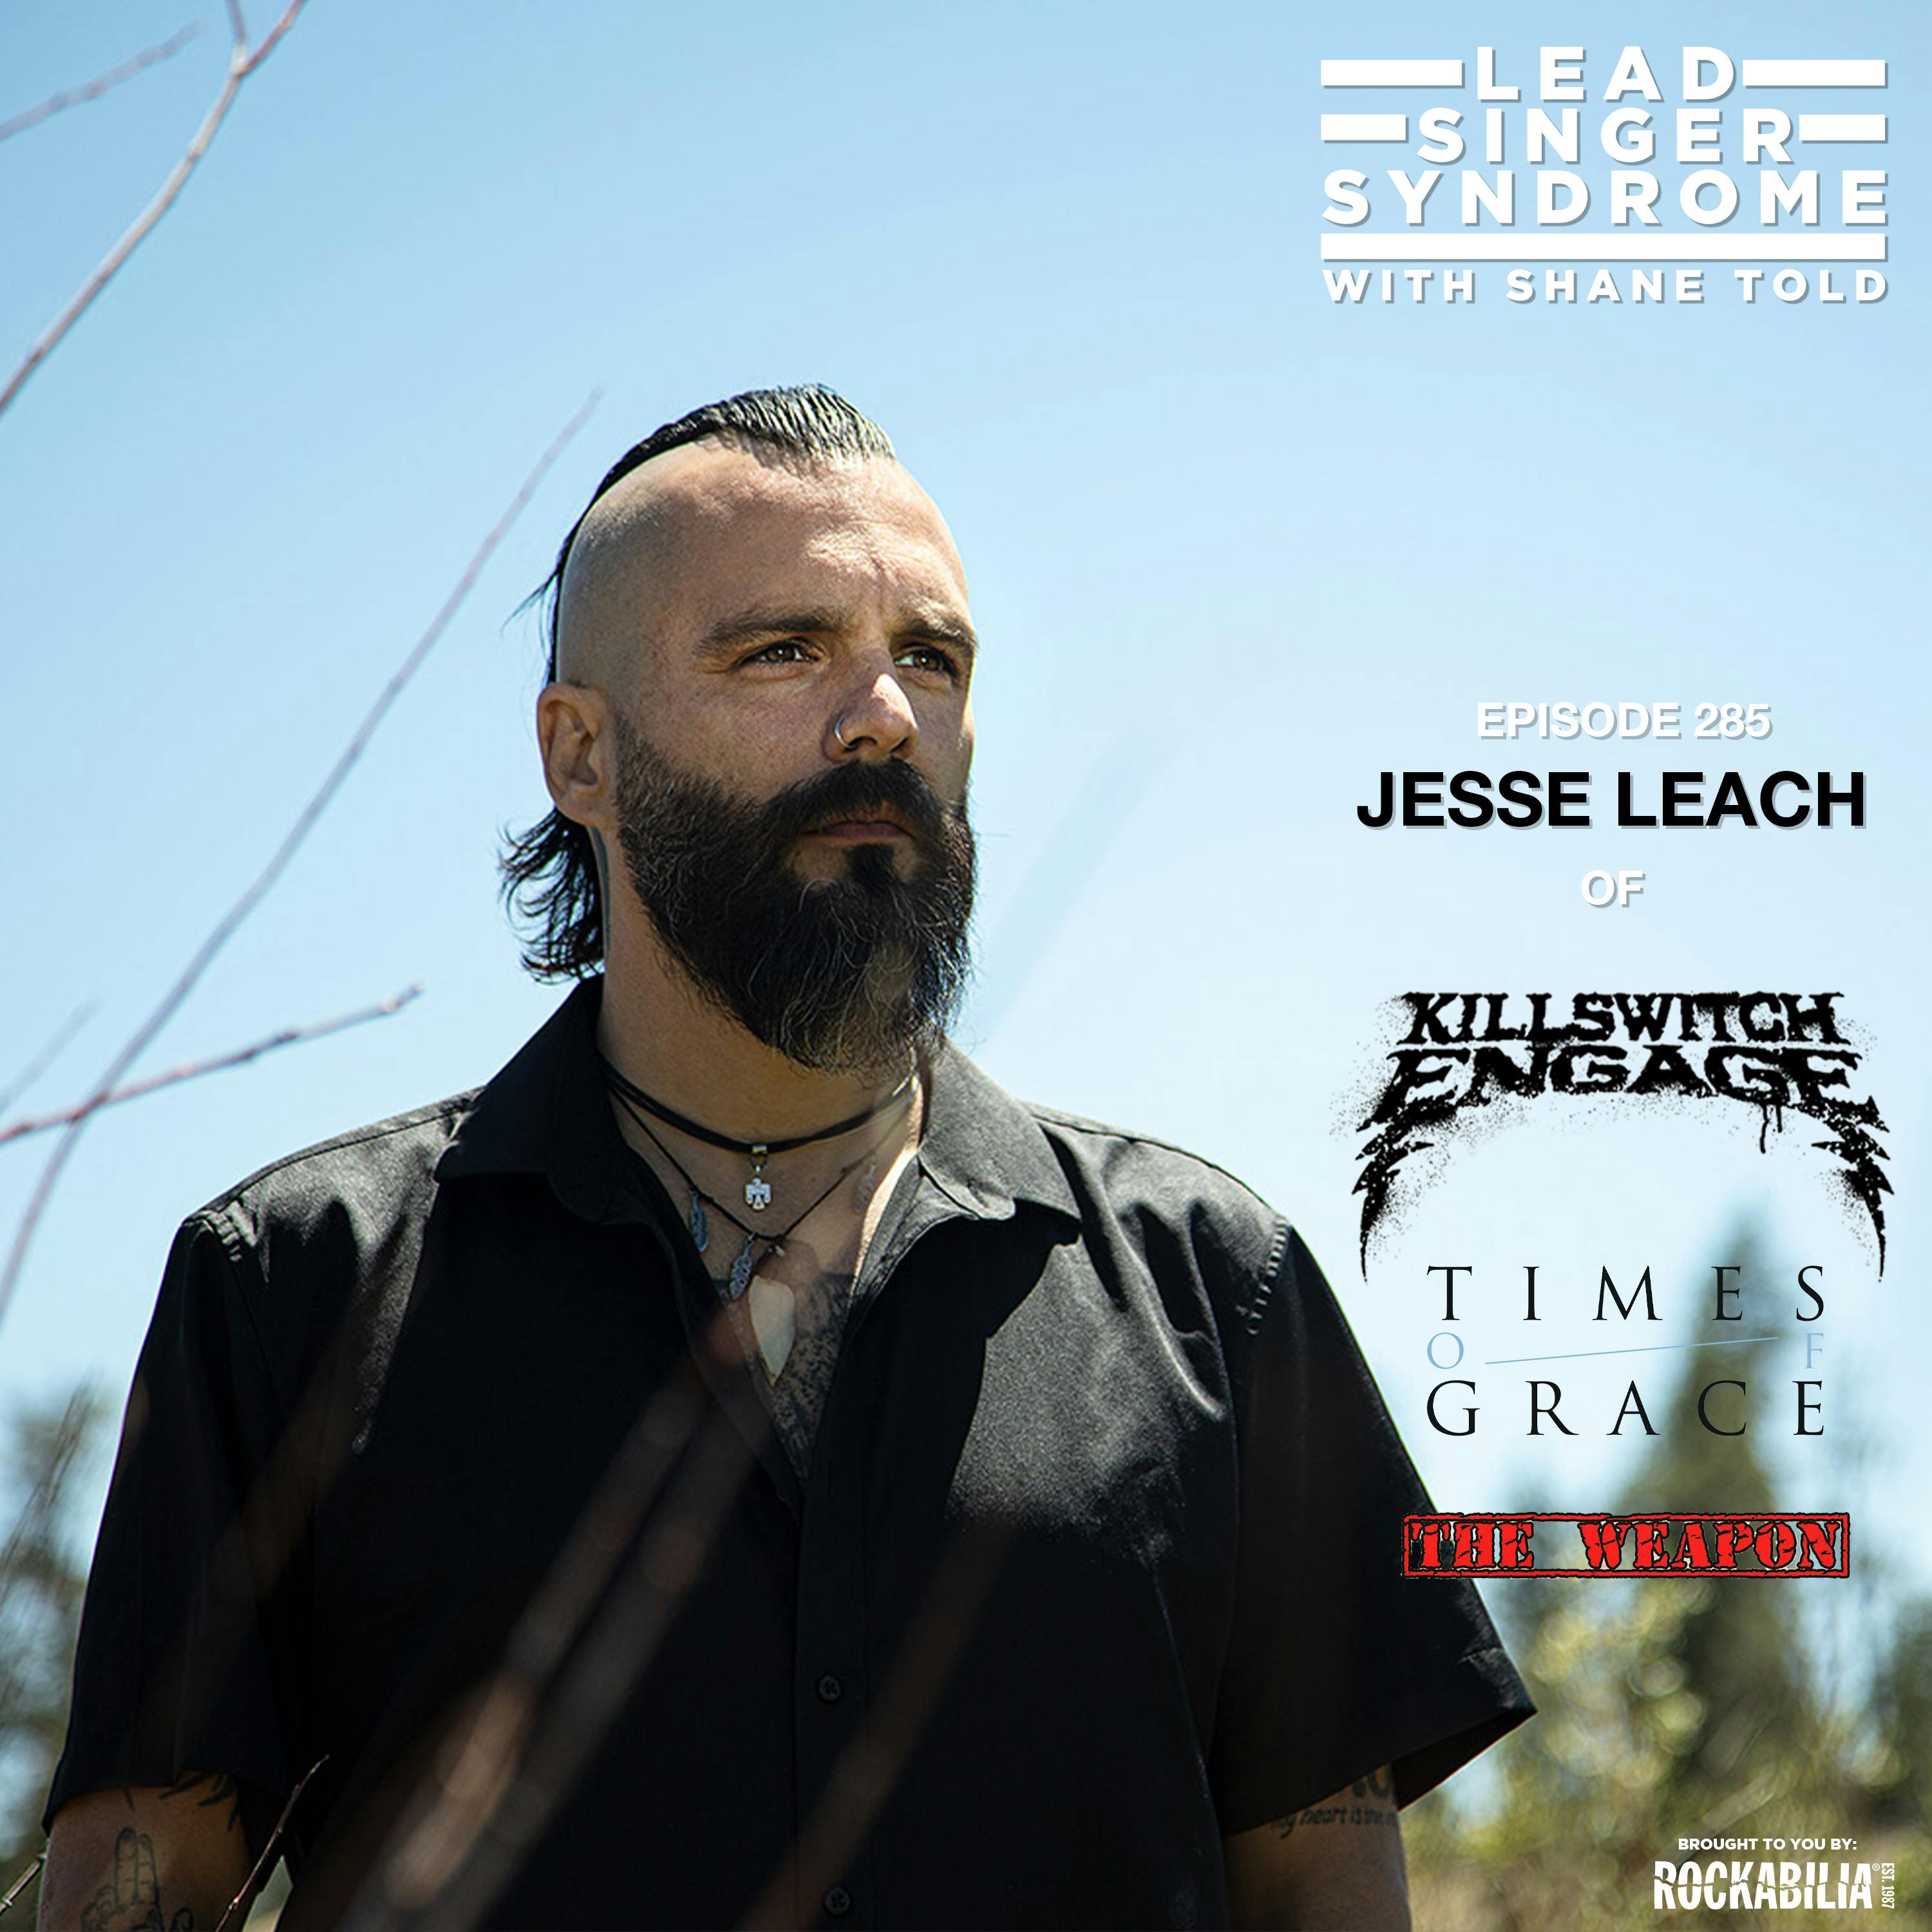 Jesse Leach (Killswitch Engage, Times of Grace, The Weapon) - Lead